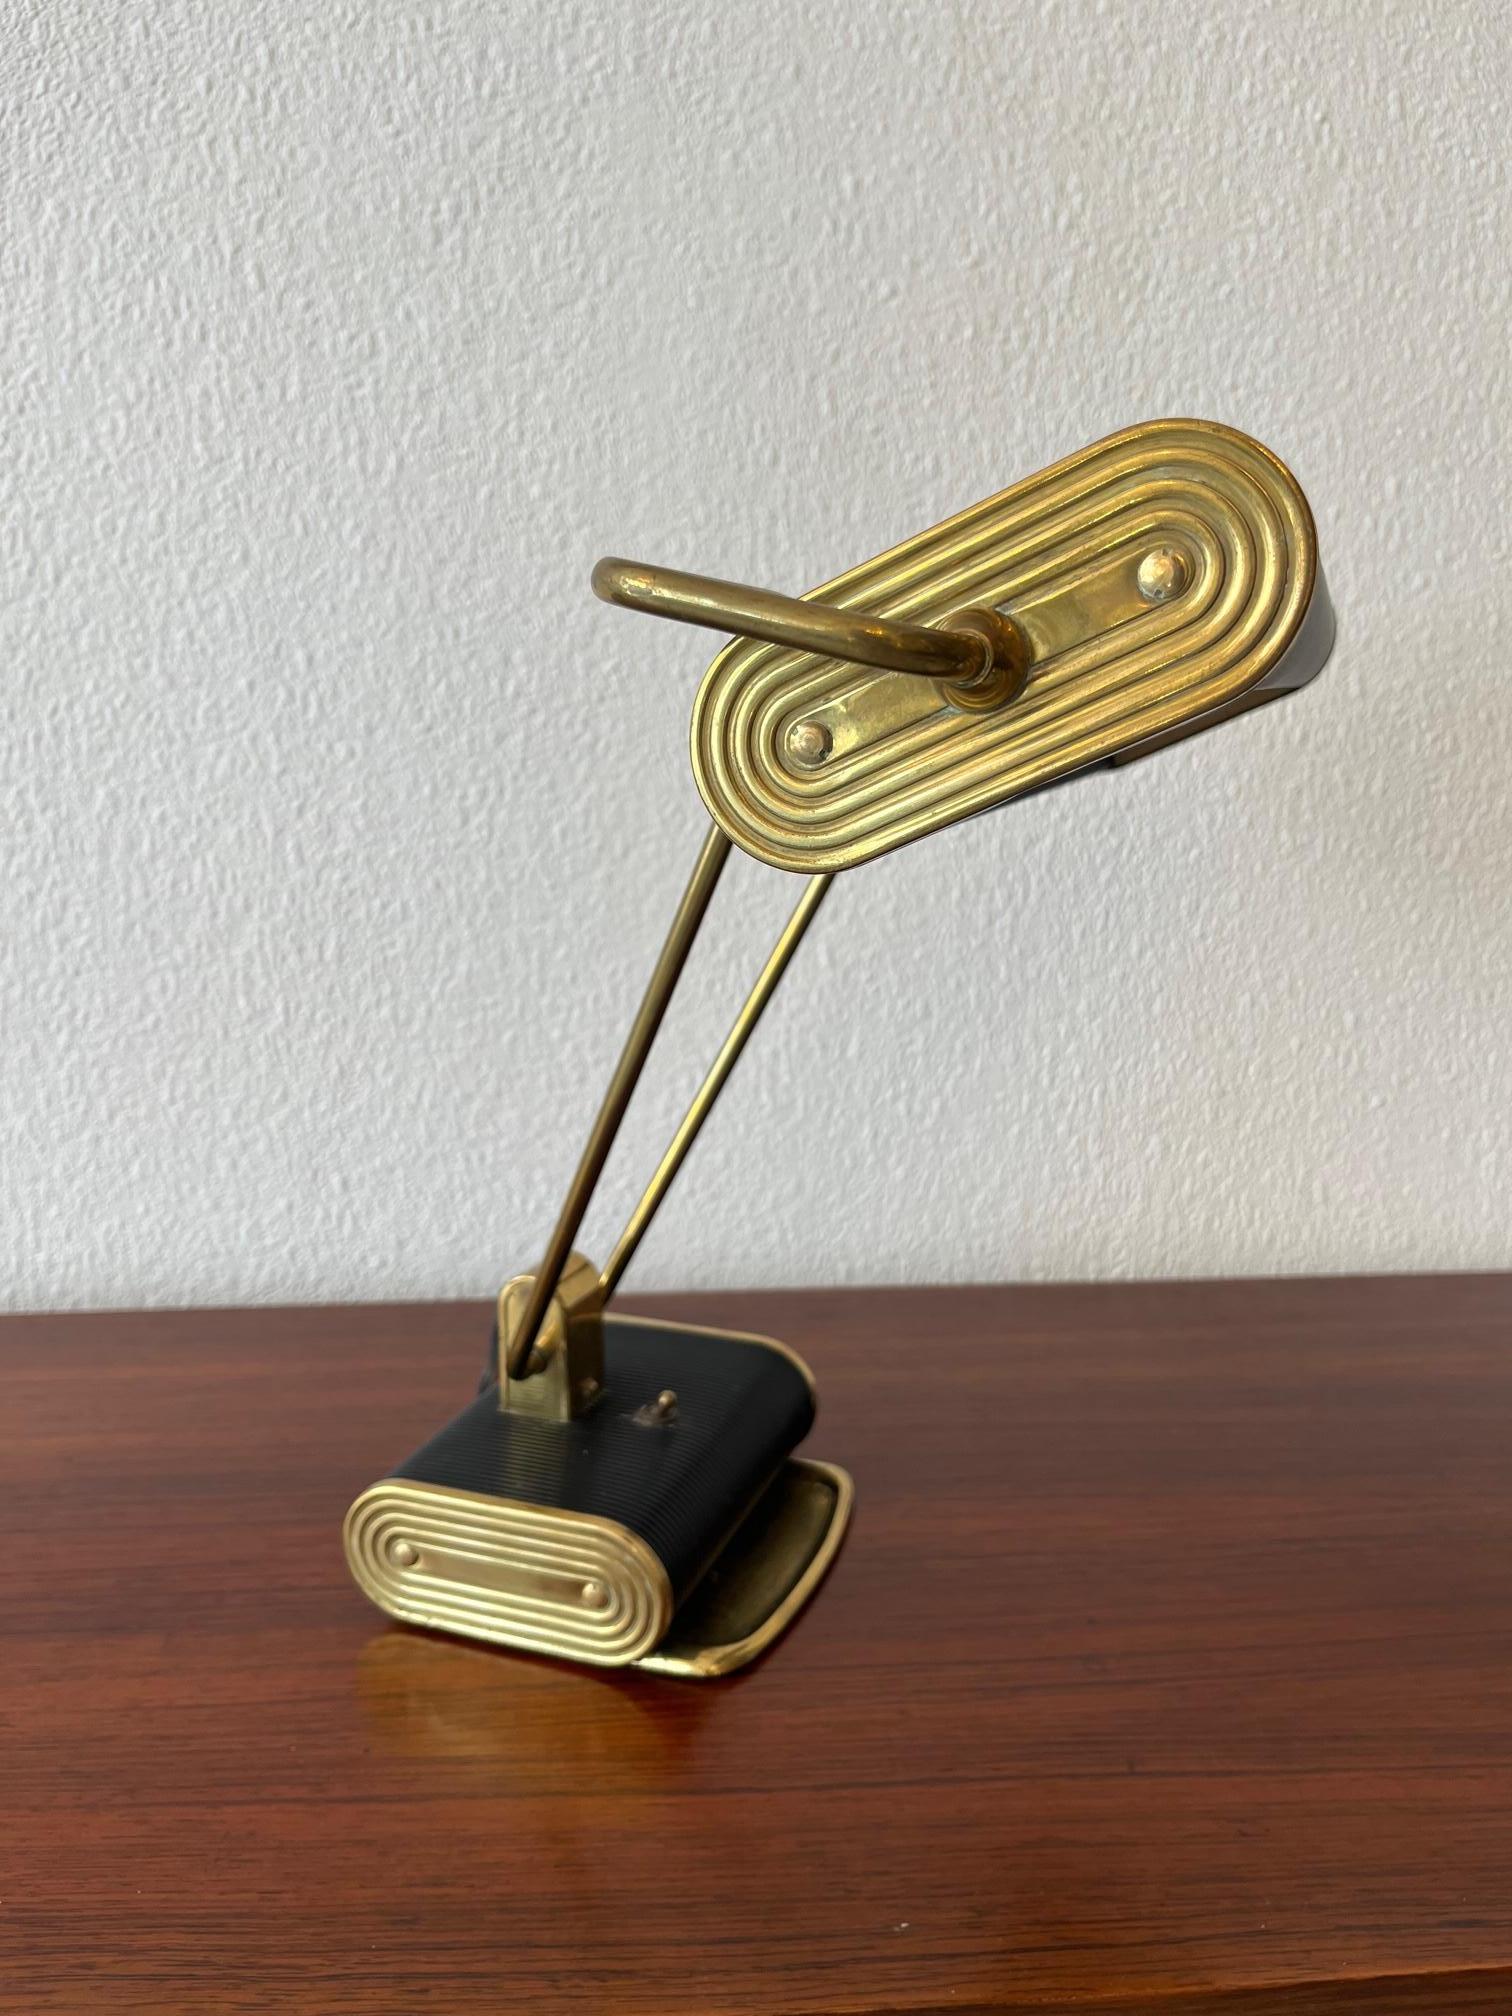 Brass & Aluminum Adjustable Desk Lamp by Eileen Gray for Jumo, France ca. 1940s For Sale 5